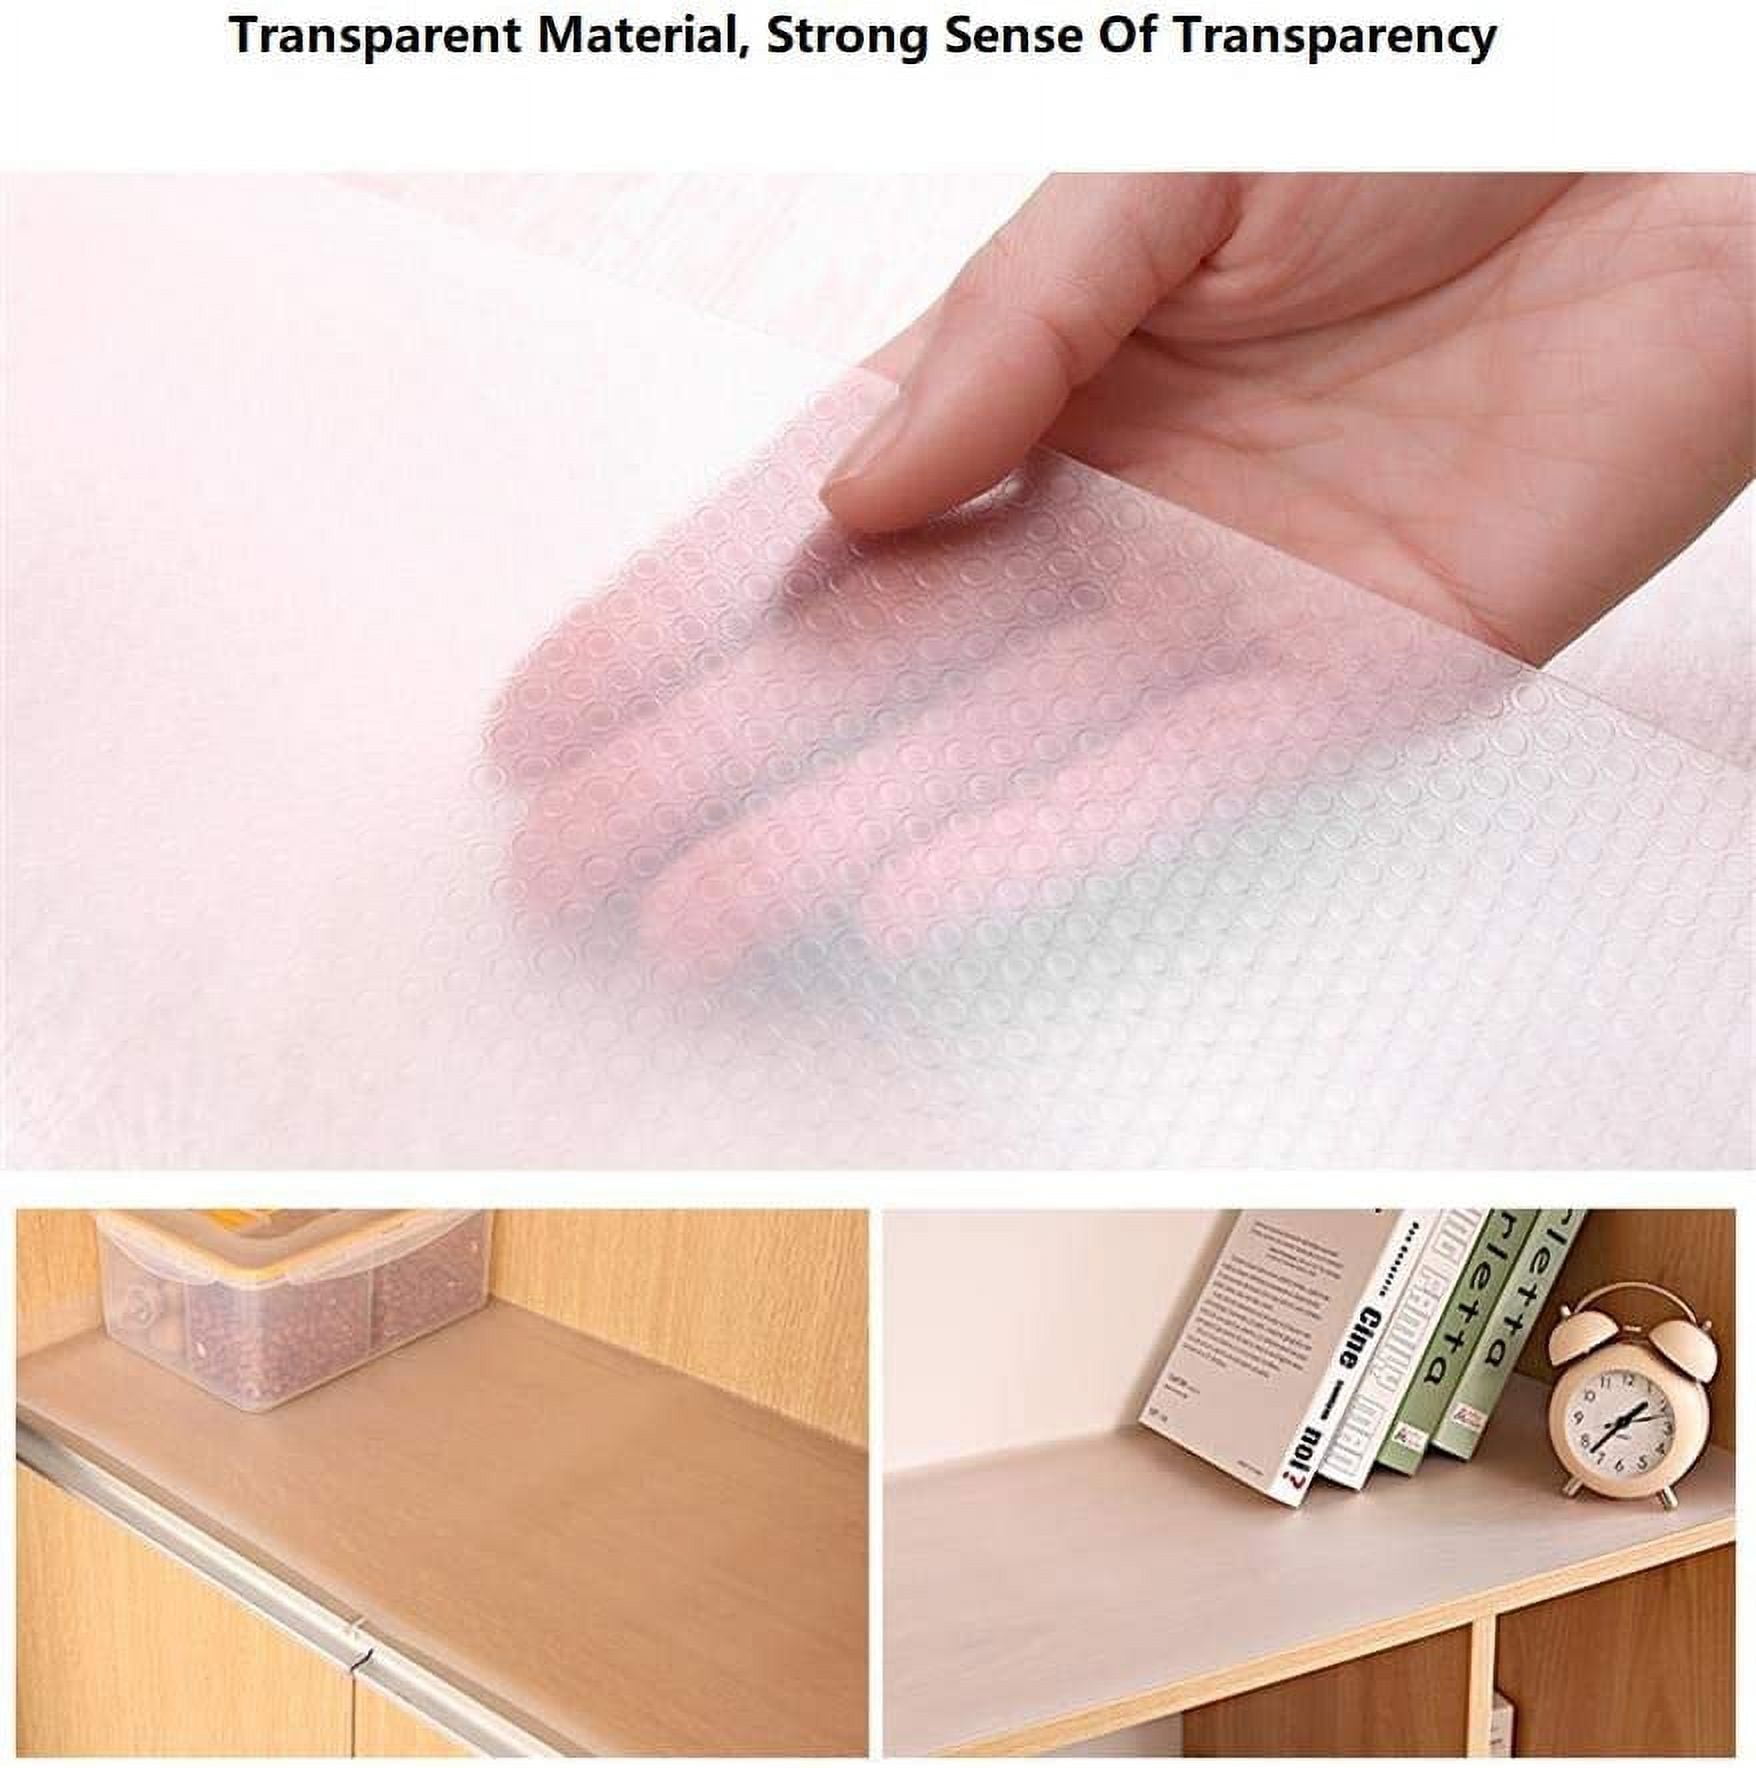 Christmas gift,Plastic Shelf and Drawer Liner,Non Adhesive Waterproof roll  for Cabinets, Storage, Kitchen,Desks,Deco Shelf Liners-Clear 